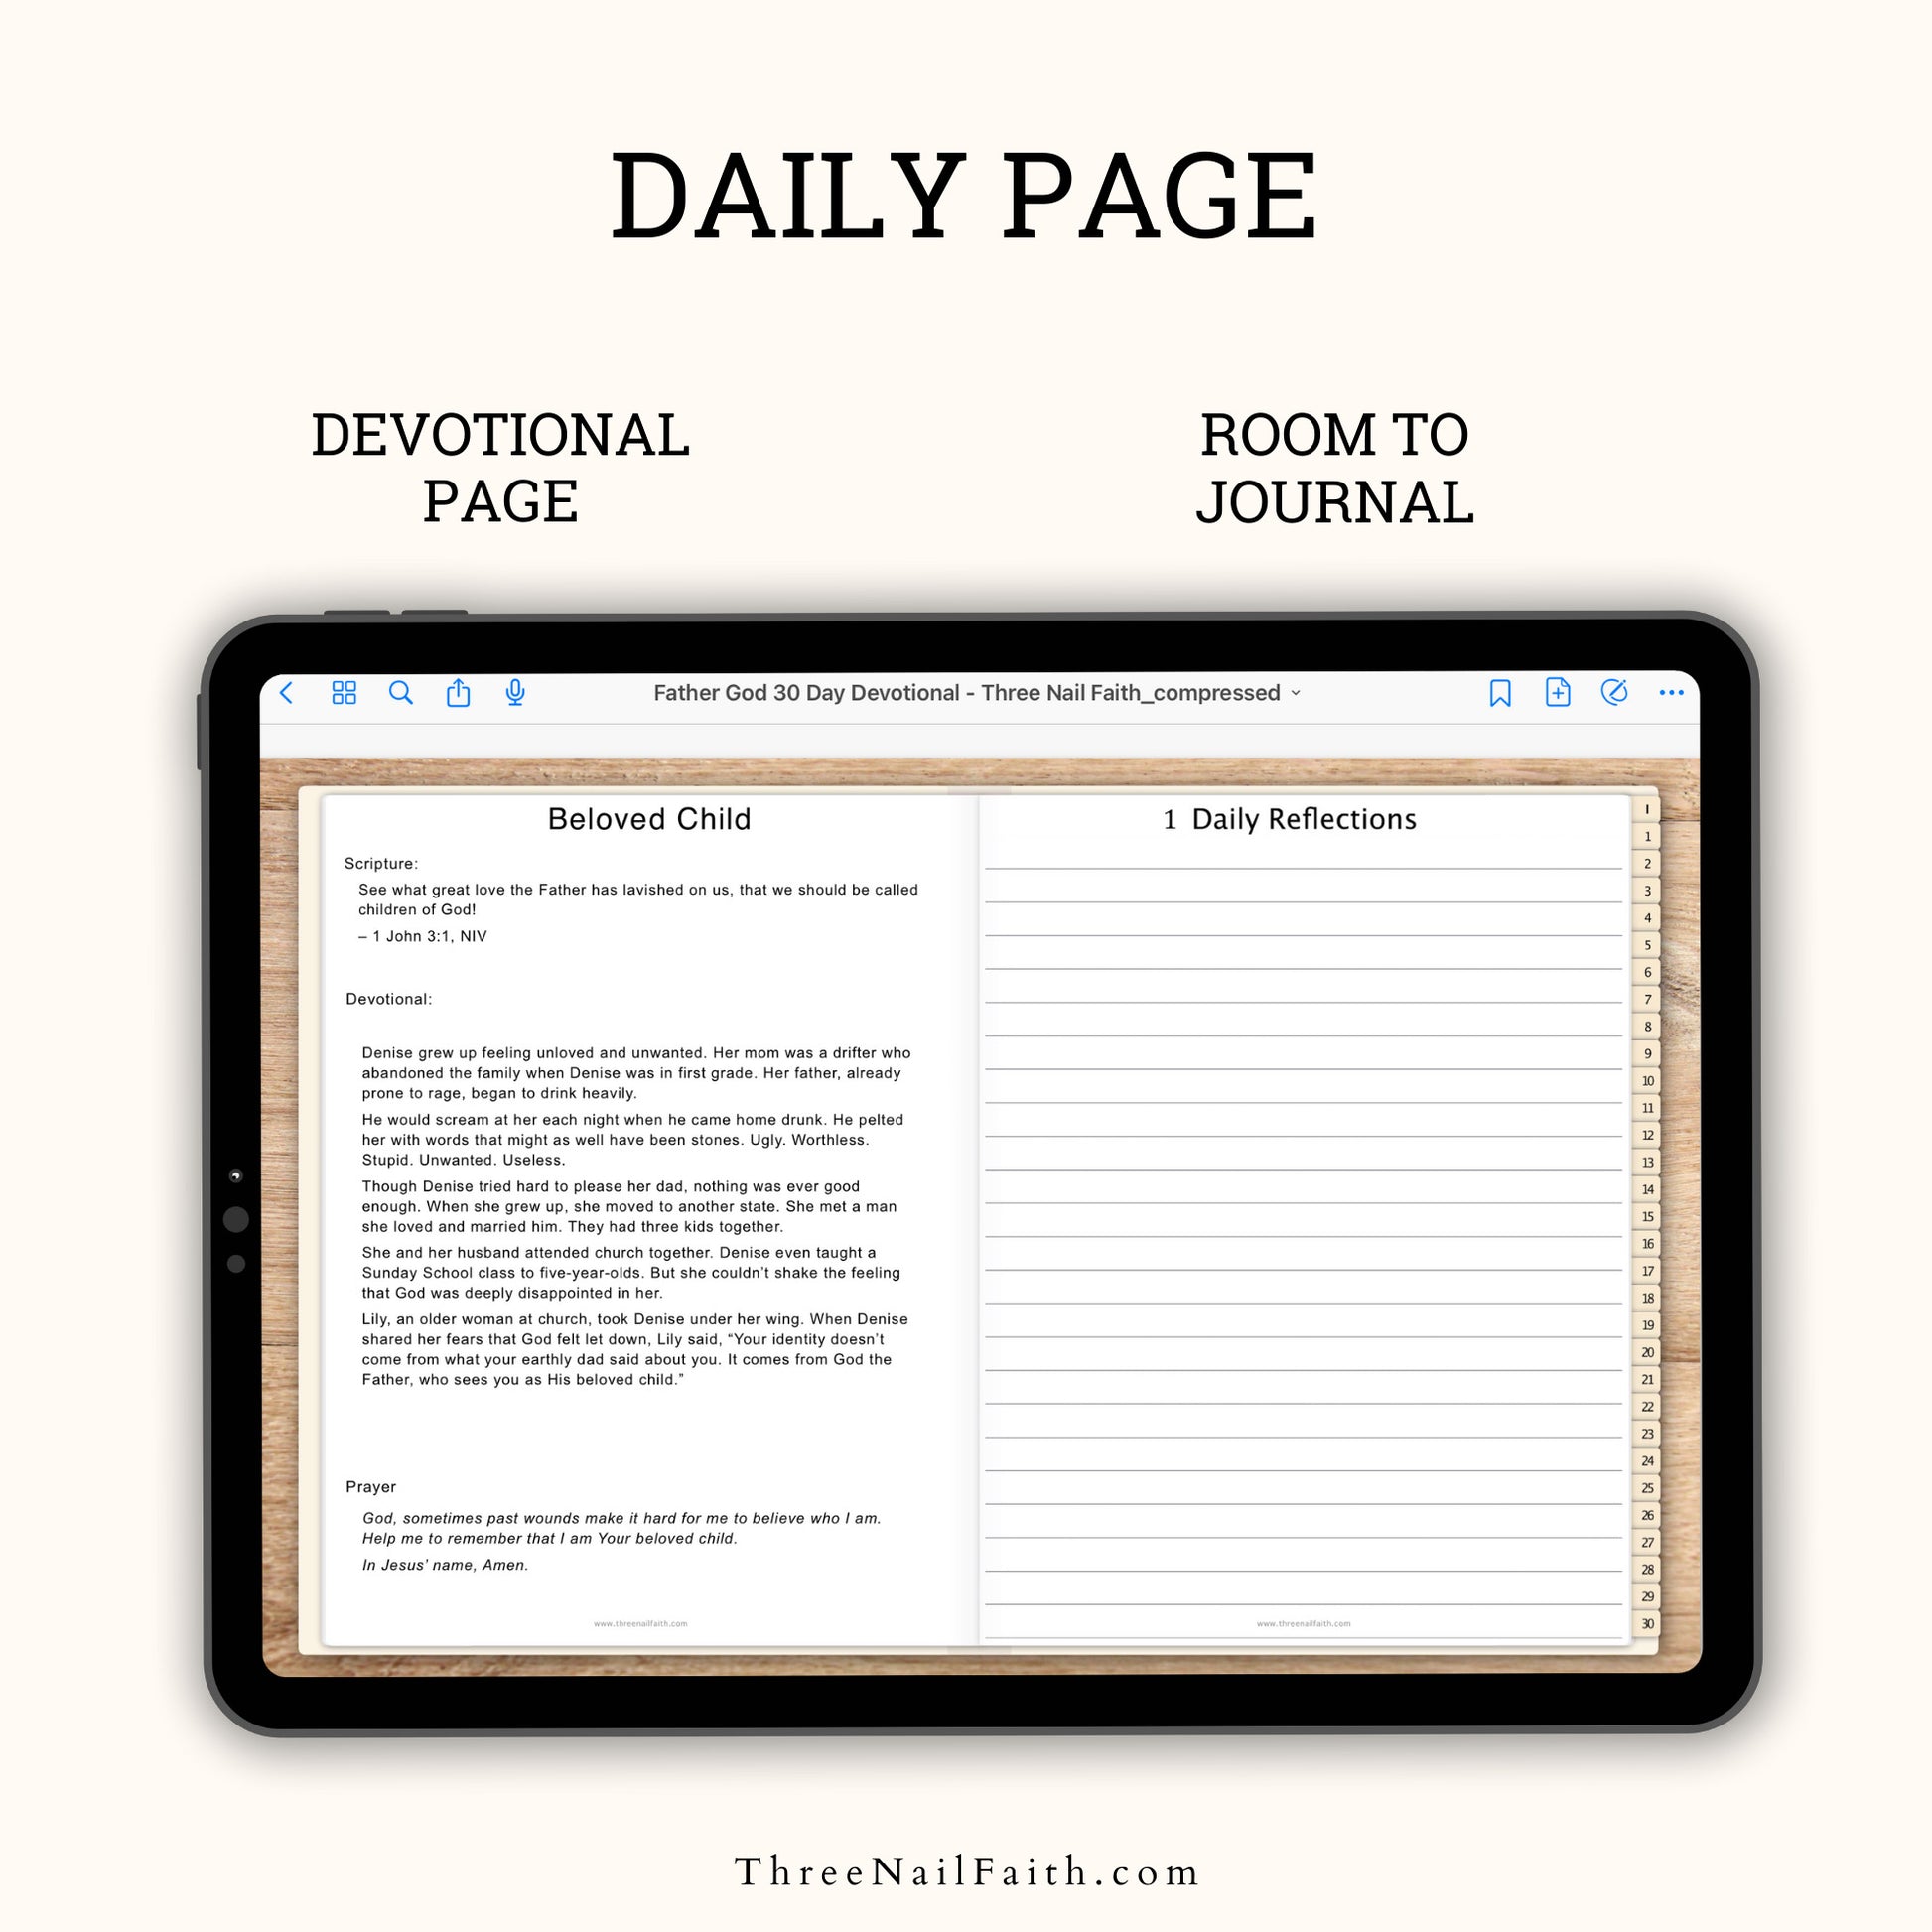 Daily page of Father God 30 Day Devotional Digital Journal